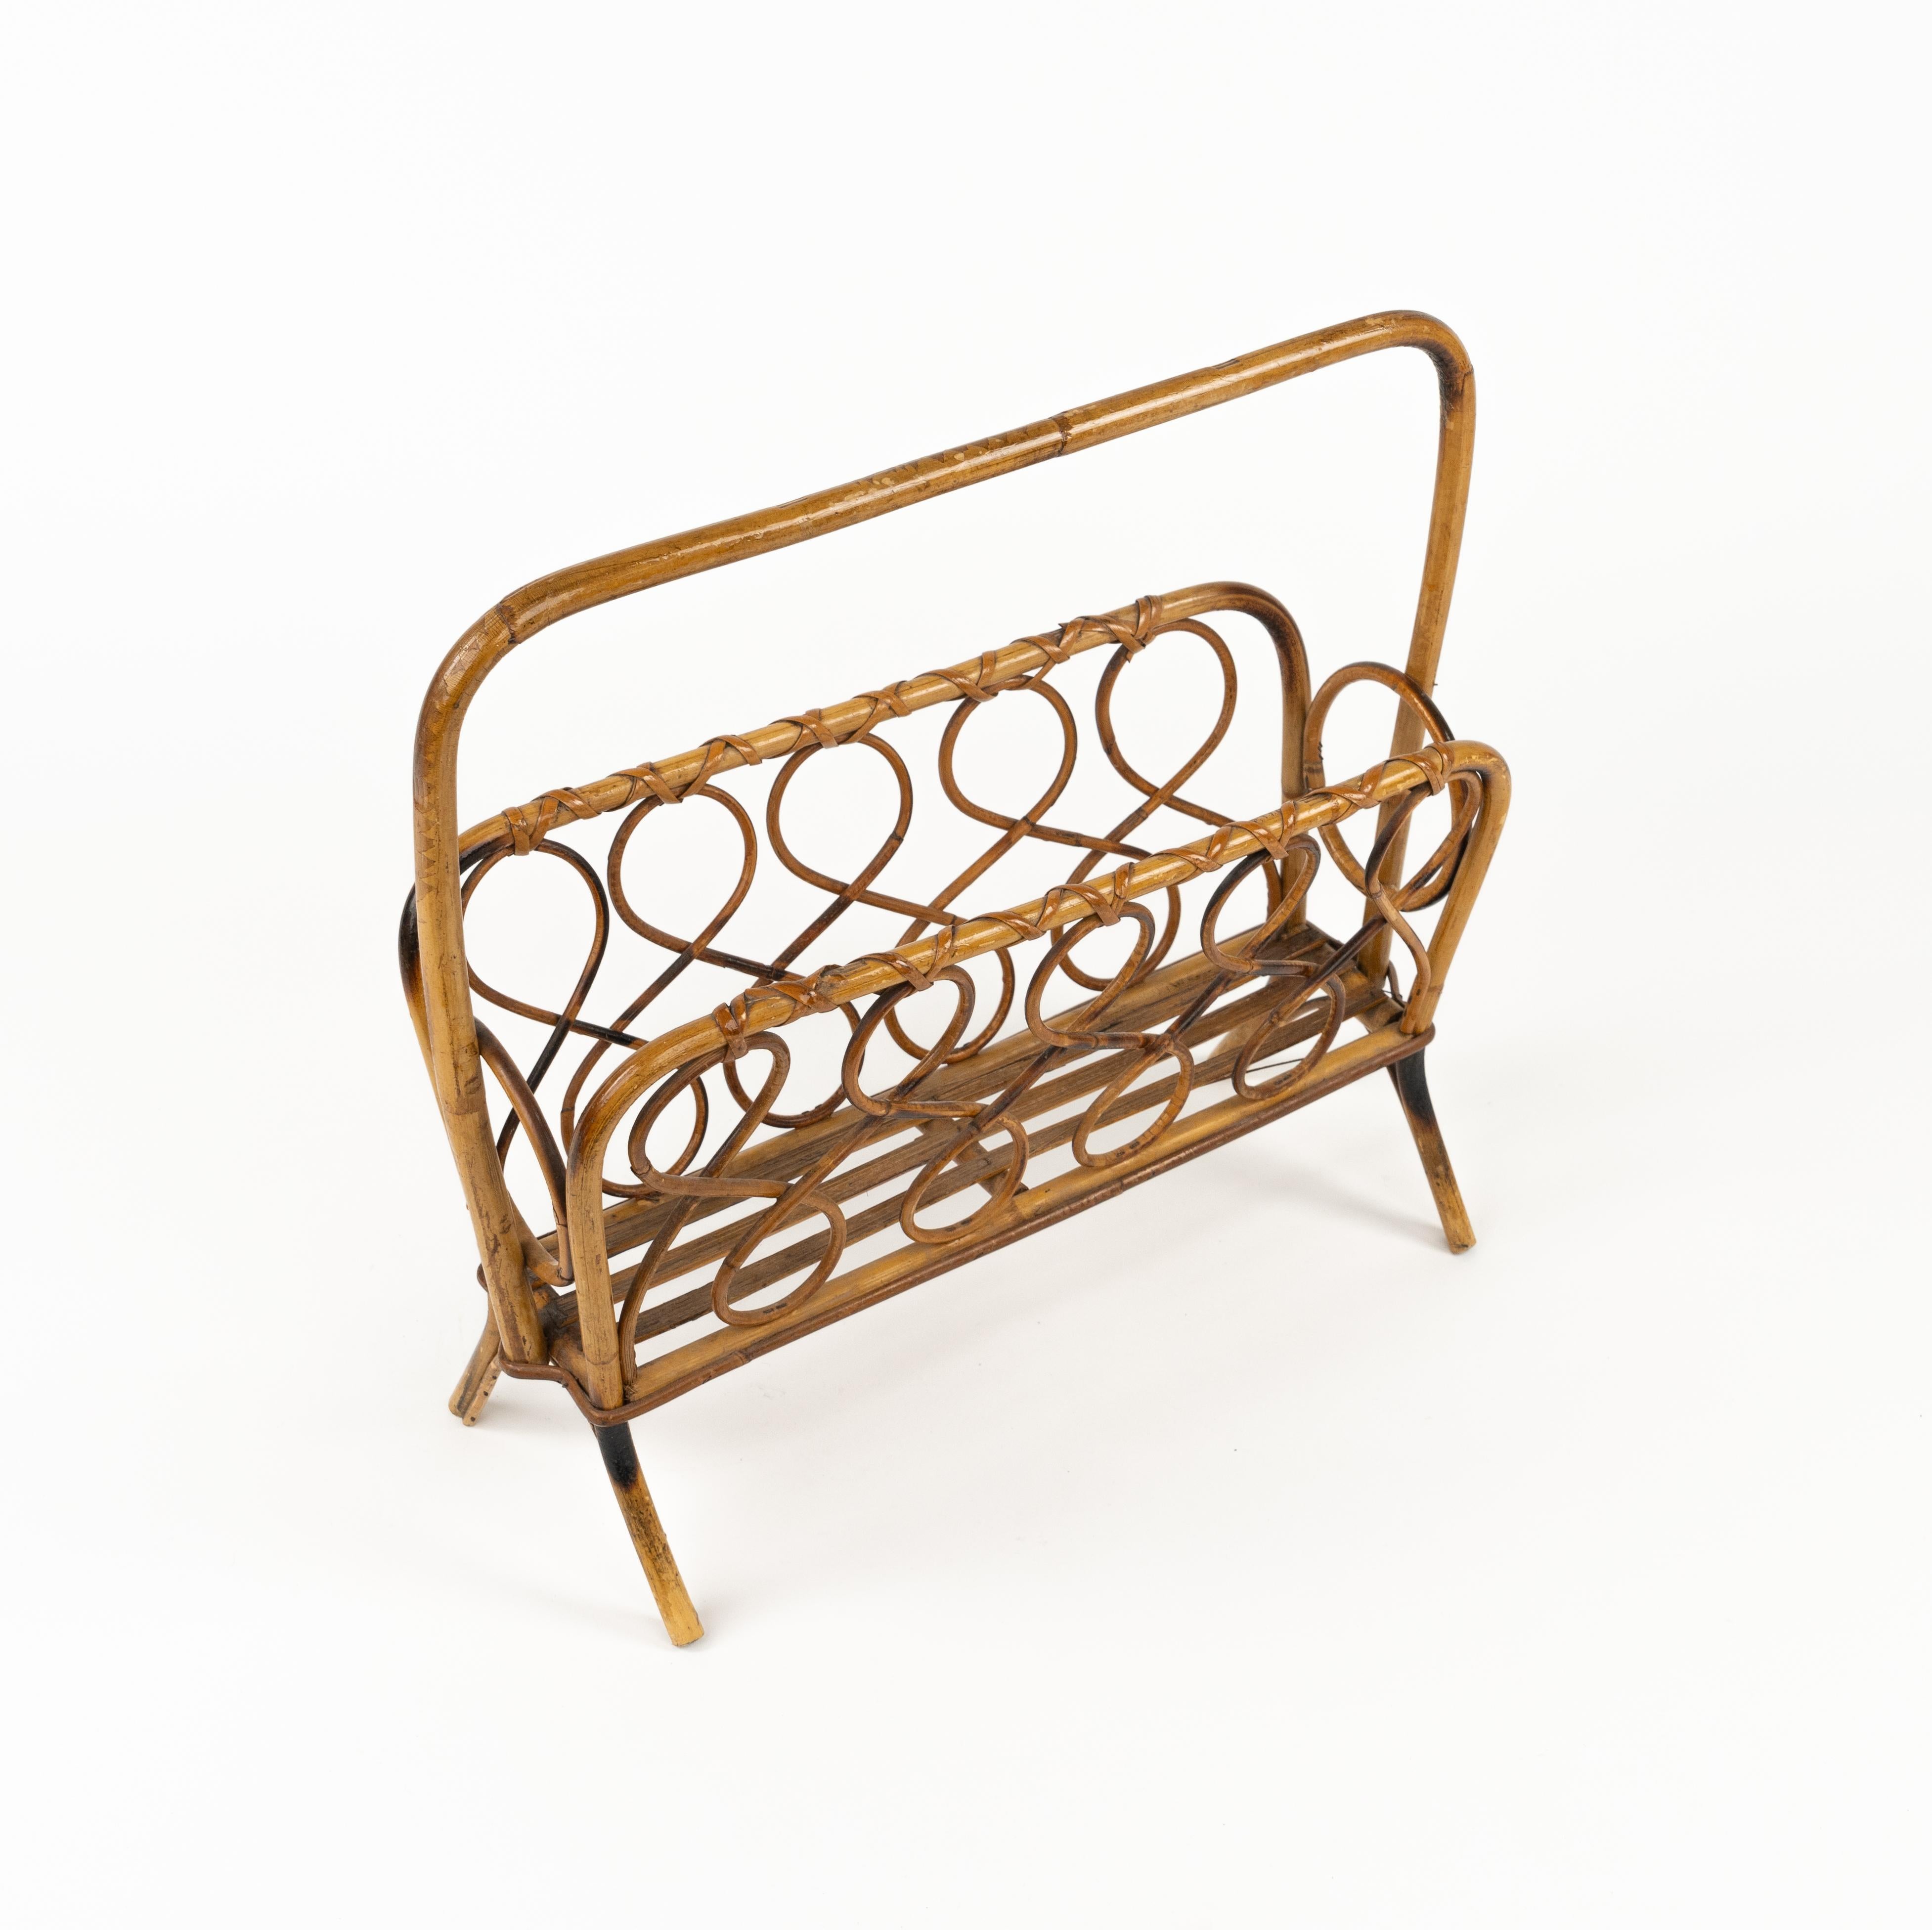 Midcentury Rattan and Bamboo Magazine Rack, Italy 1960s For Sale 1